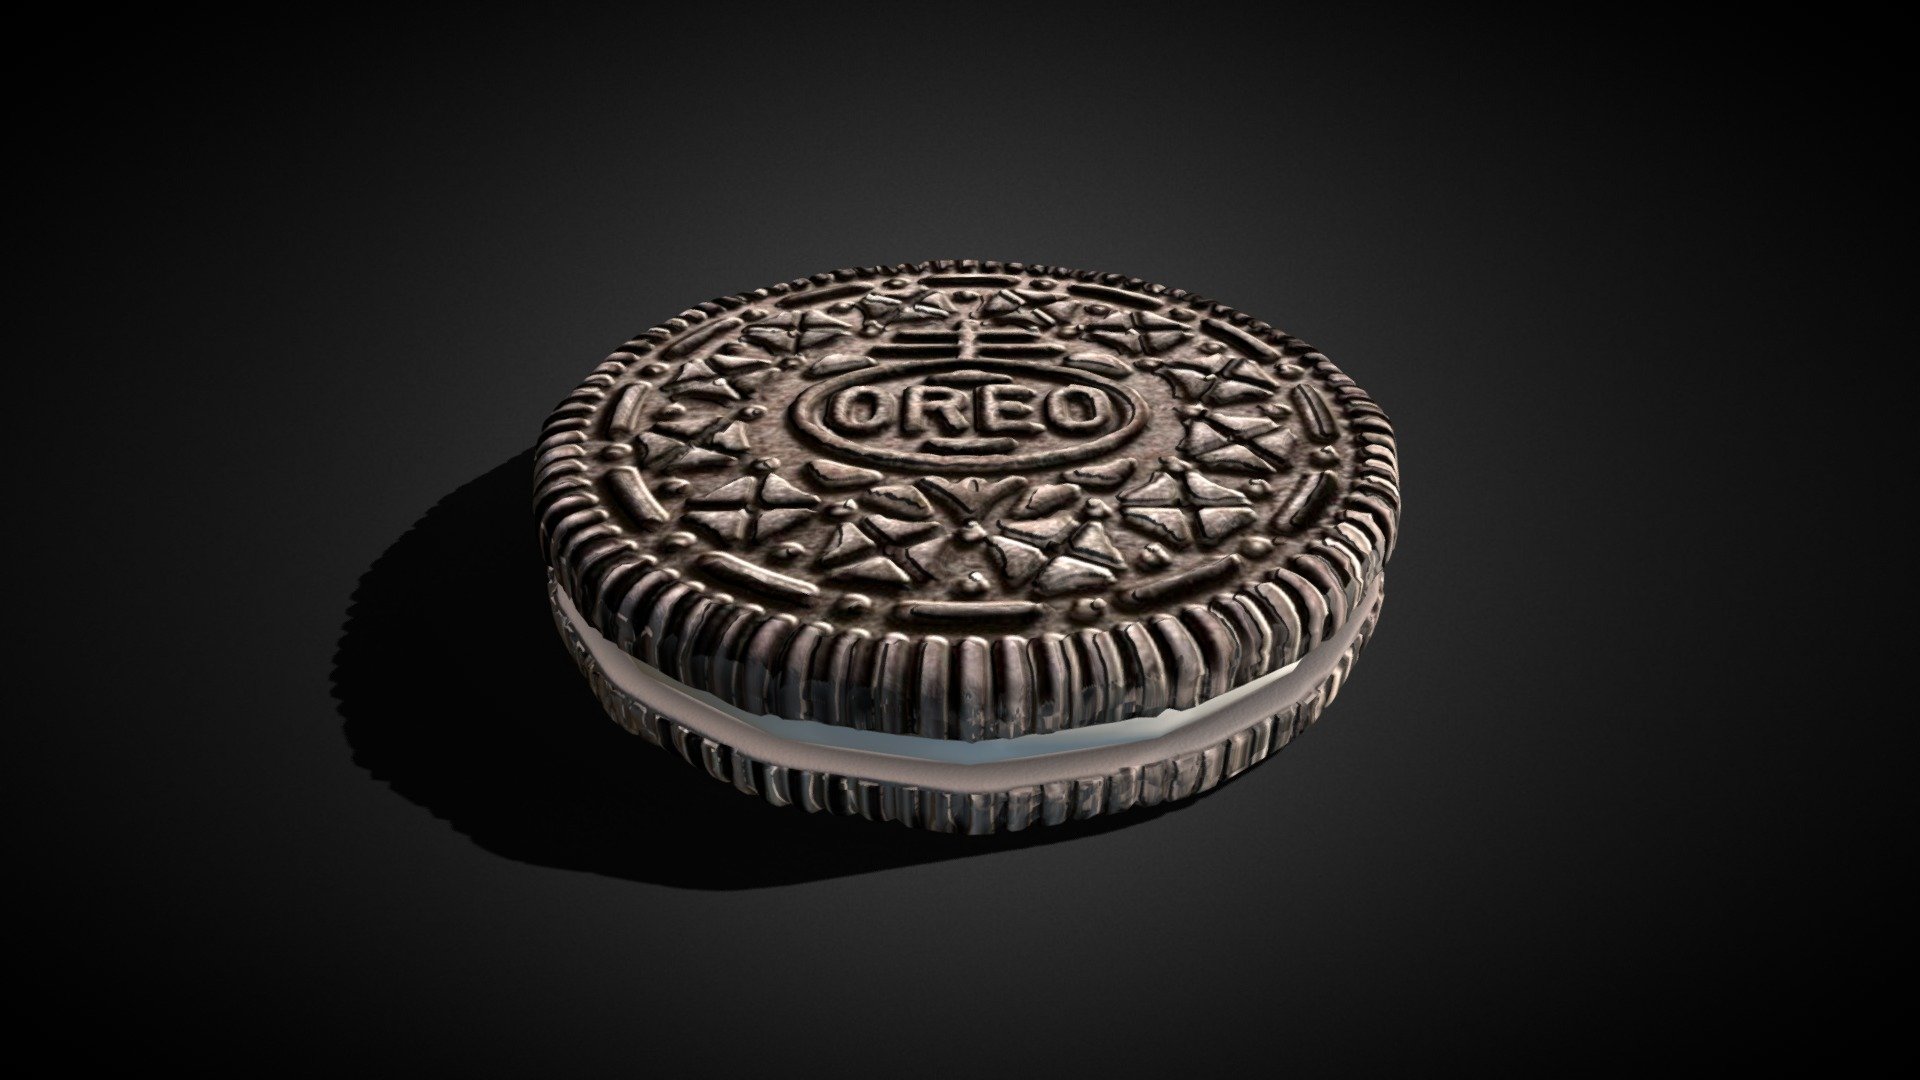 An Oreo cookie made for a practice could work for renders it has 82004 verts 41014 polys and 82028 tris the textures 2048 X 2048 and are PBR Diffuse, Metal, Roughness and Normal Map if you need game assets or STL files I can do commission works 3d model